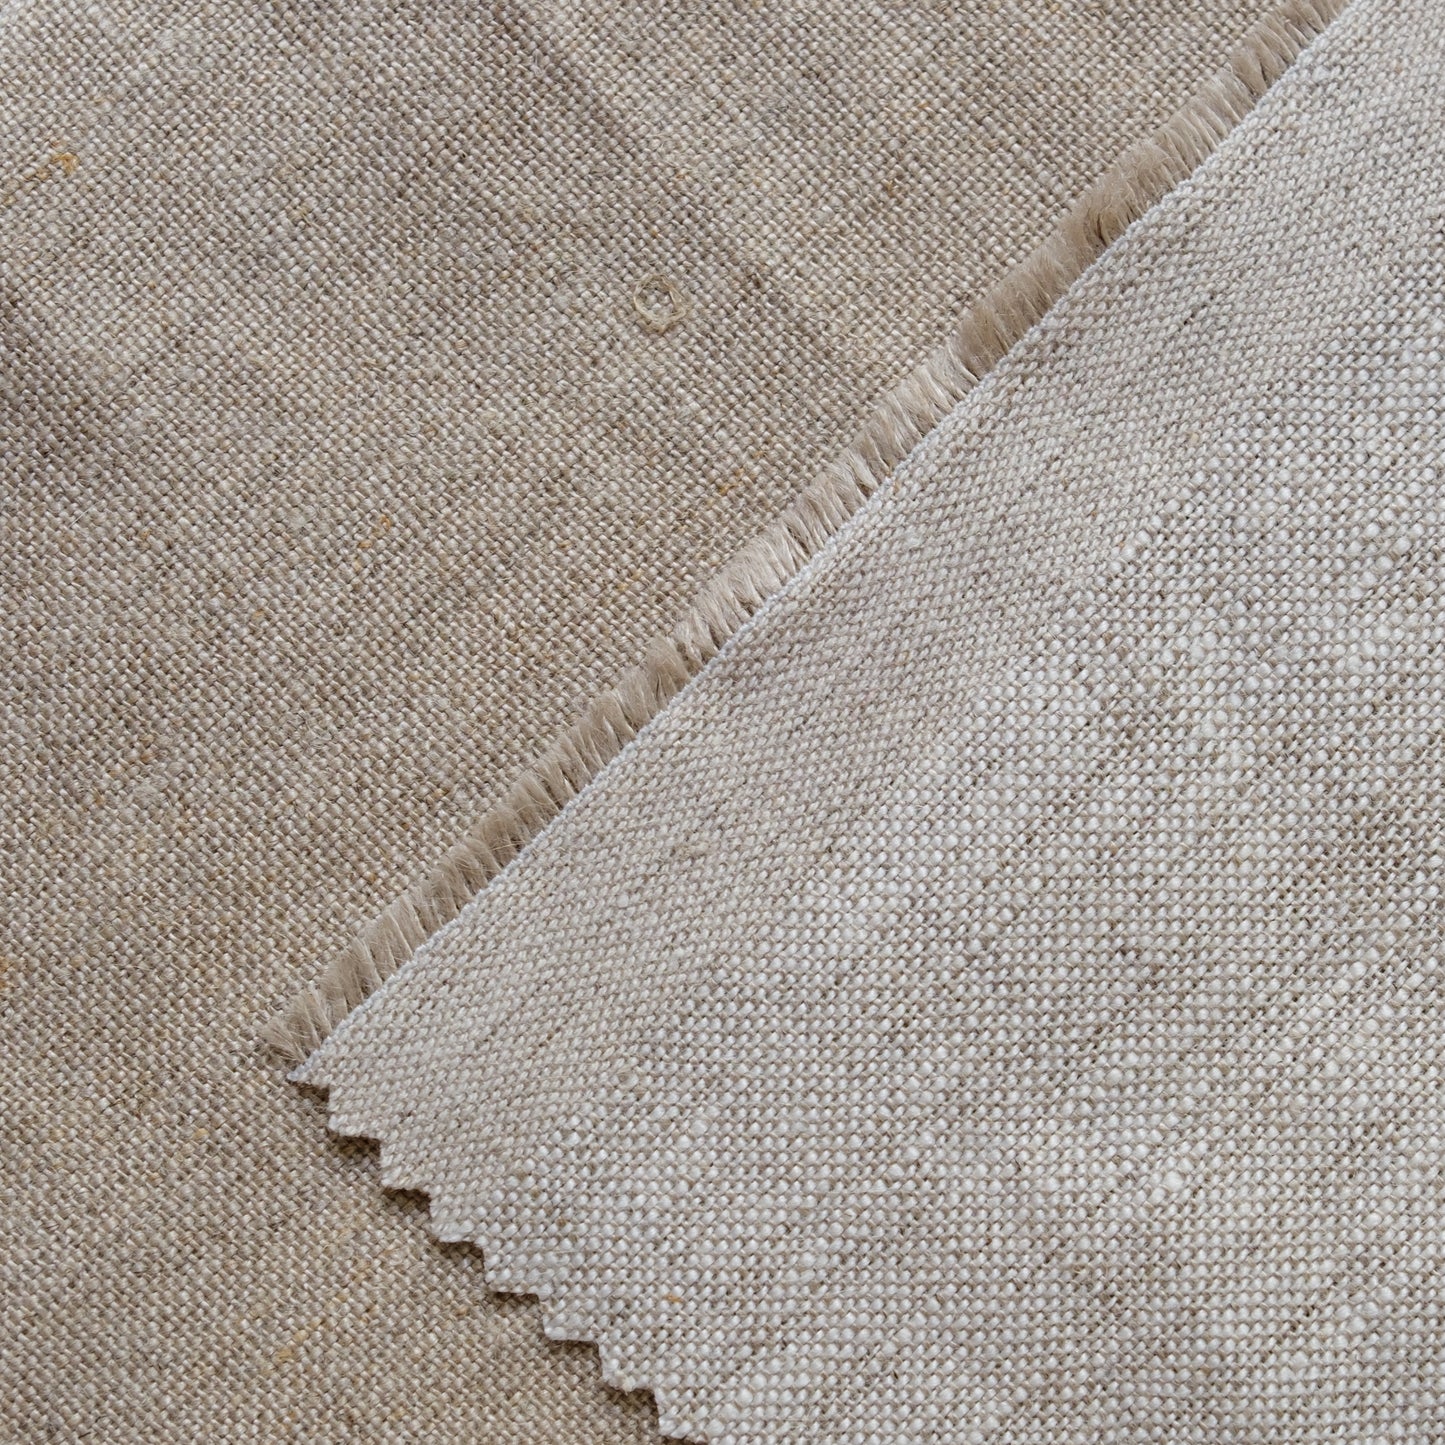 Oatmeal and Flax linen